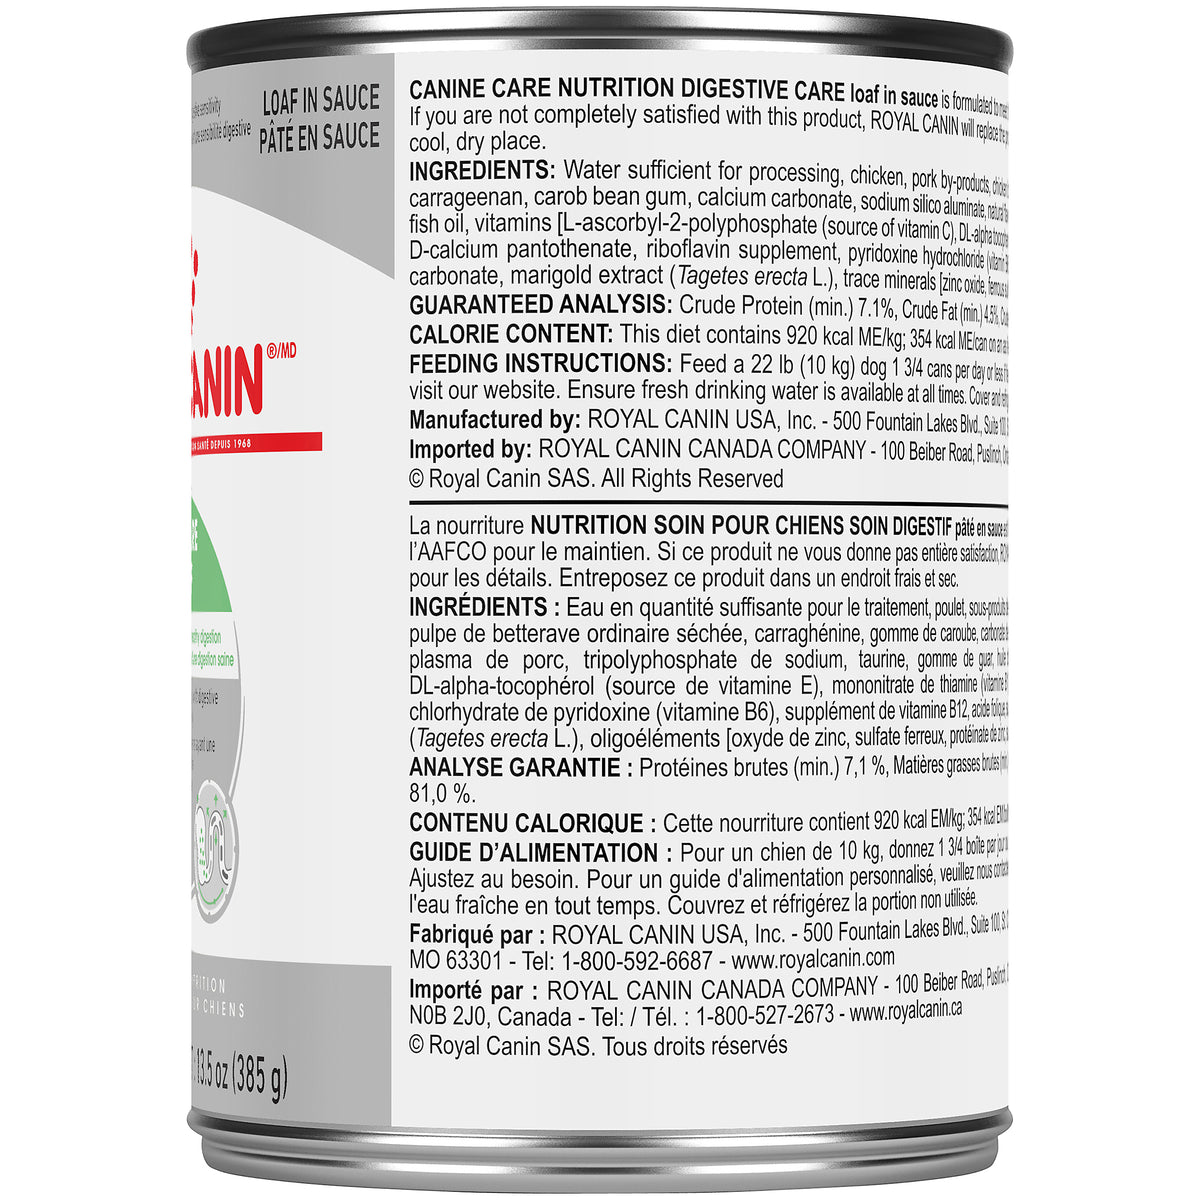 Royal Canin Canine Care Nutrition Digestive Care Loaf in Sauce Canned Dog Food (385g)